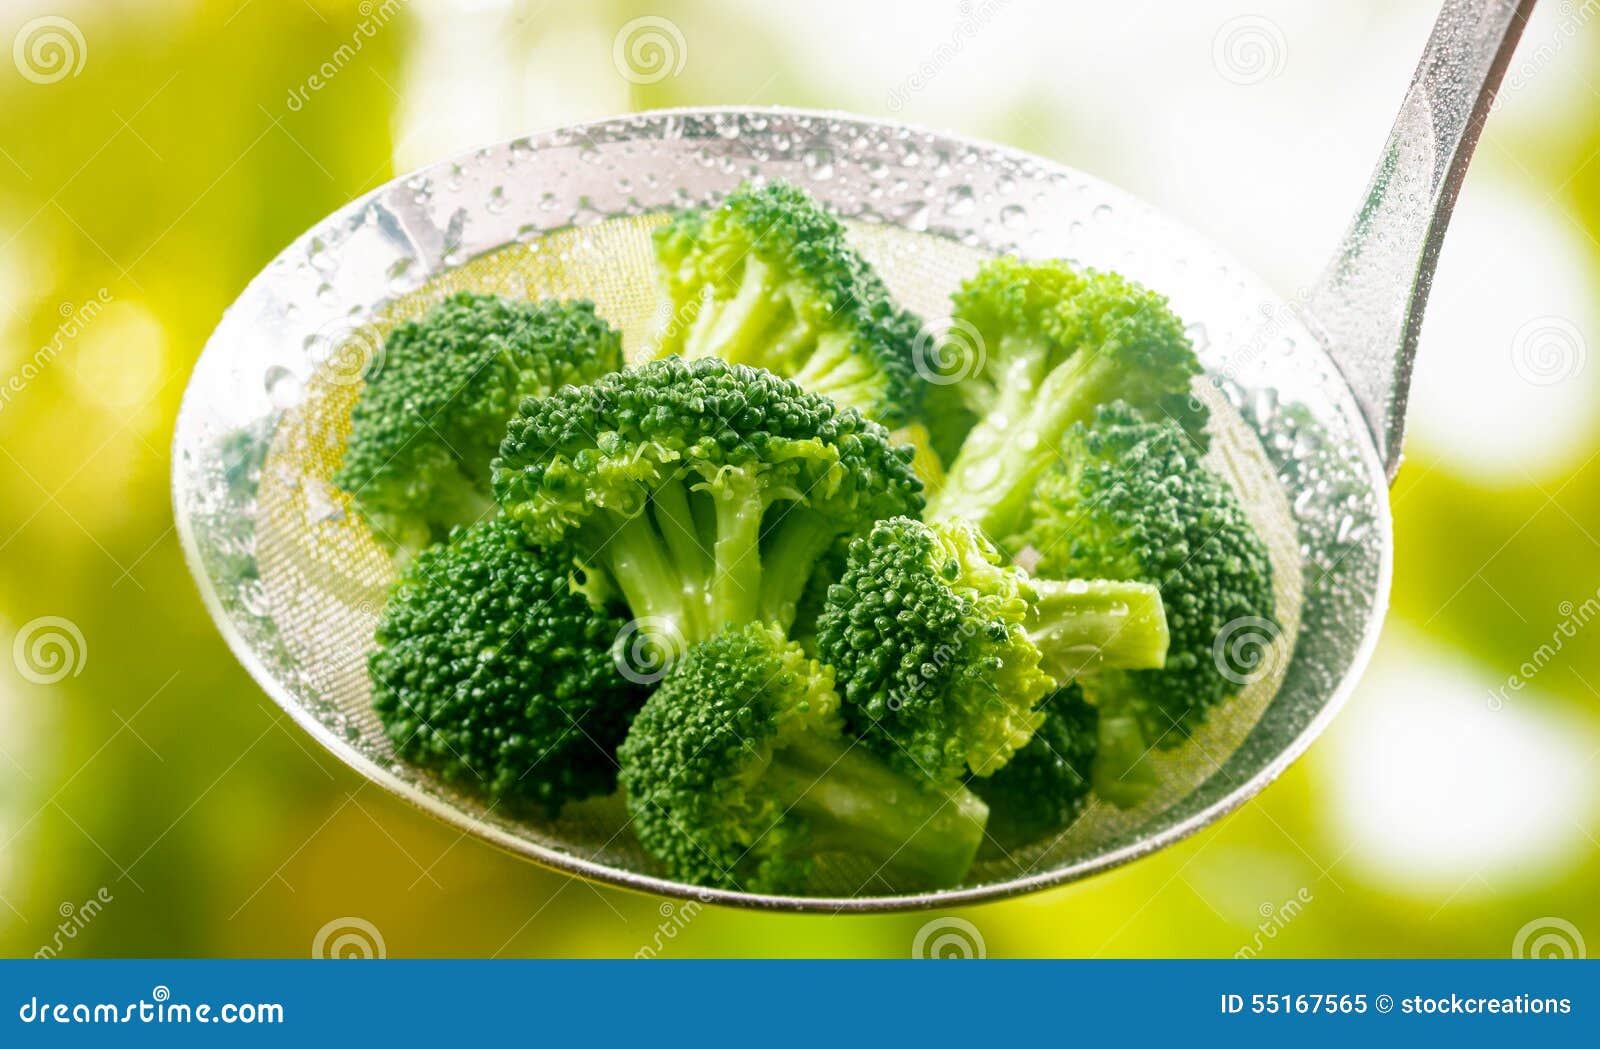 ladle full of steamed fresh young broccoli florets